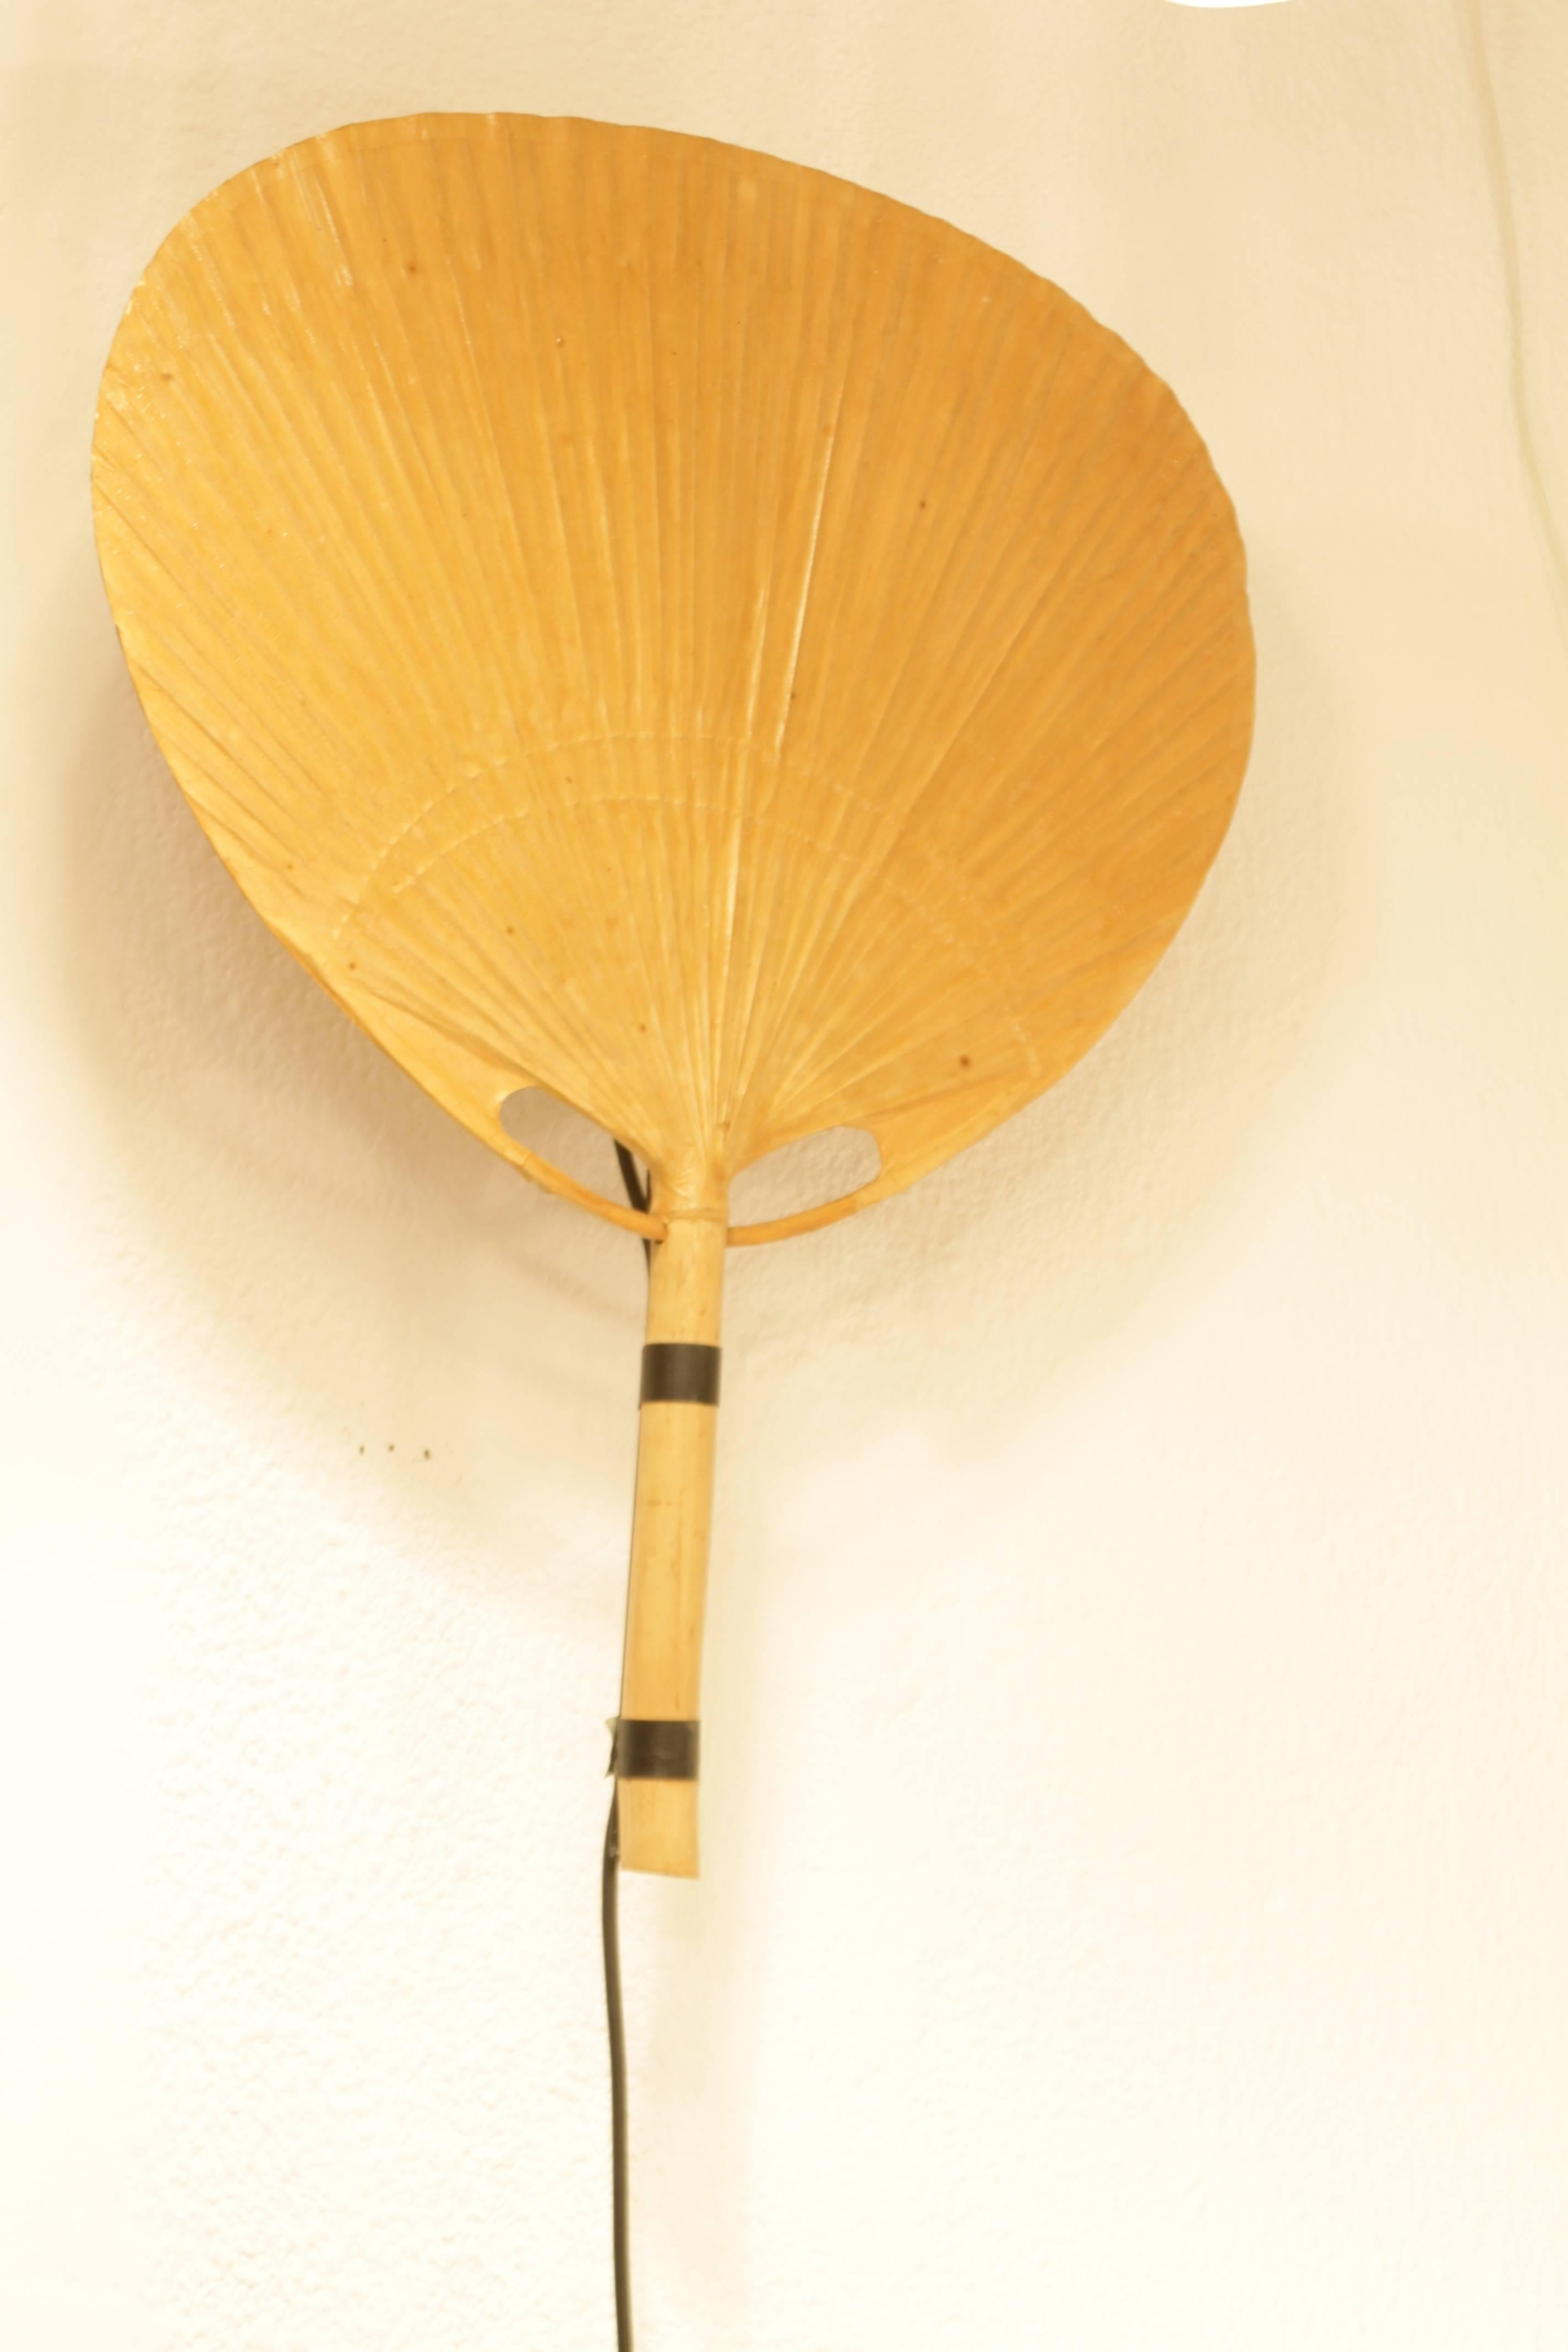 Uchiwa wall lamp by Ingo Maurer, Germany, circa 1973.
Metal fixture to hang it.
Bamboo and Japanese paper
Very good condition.